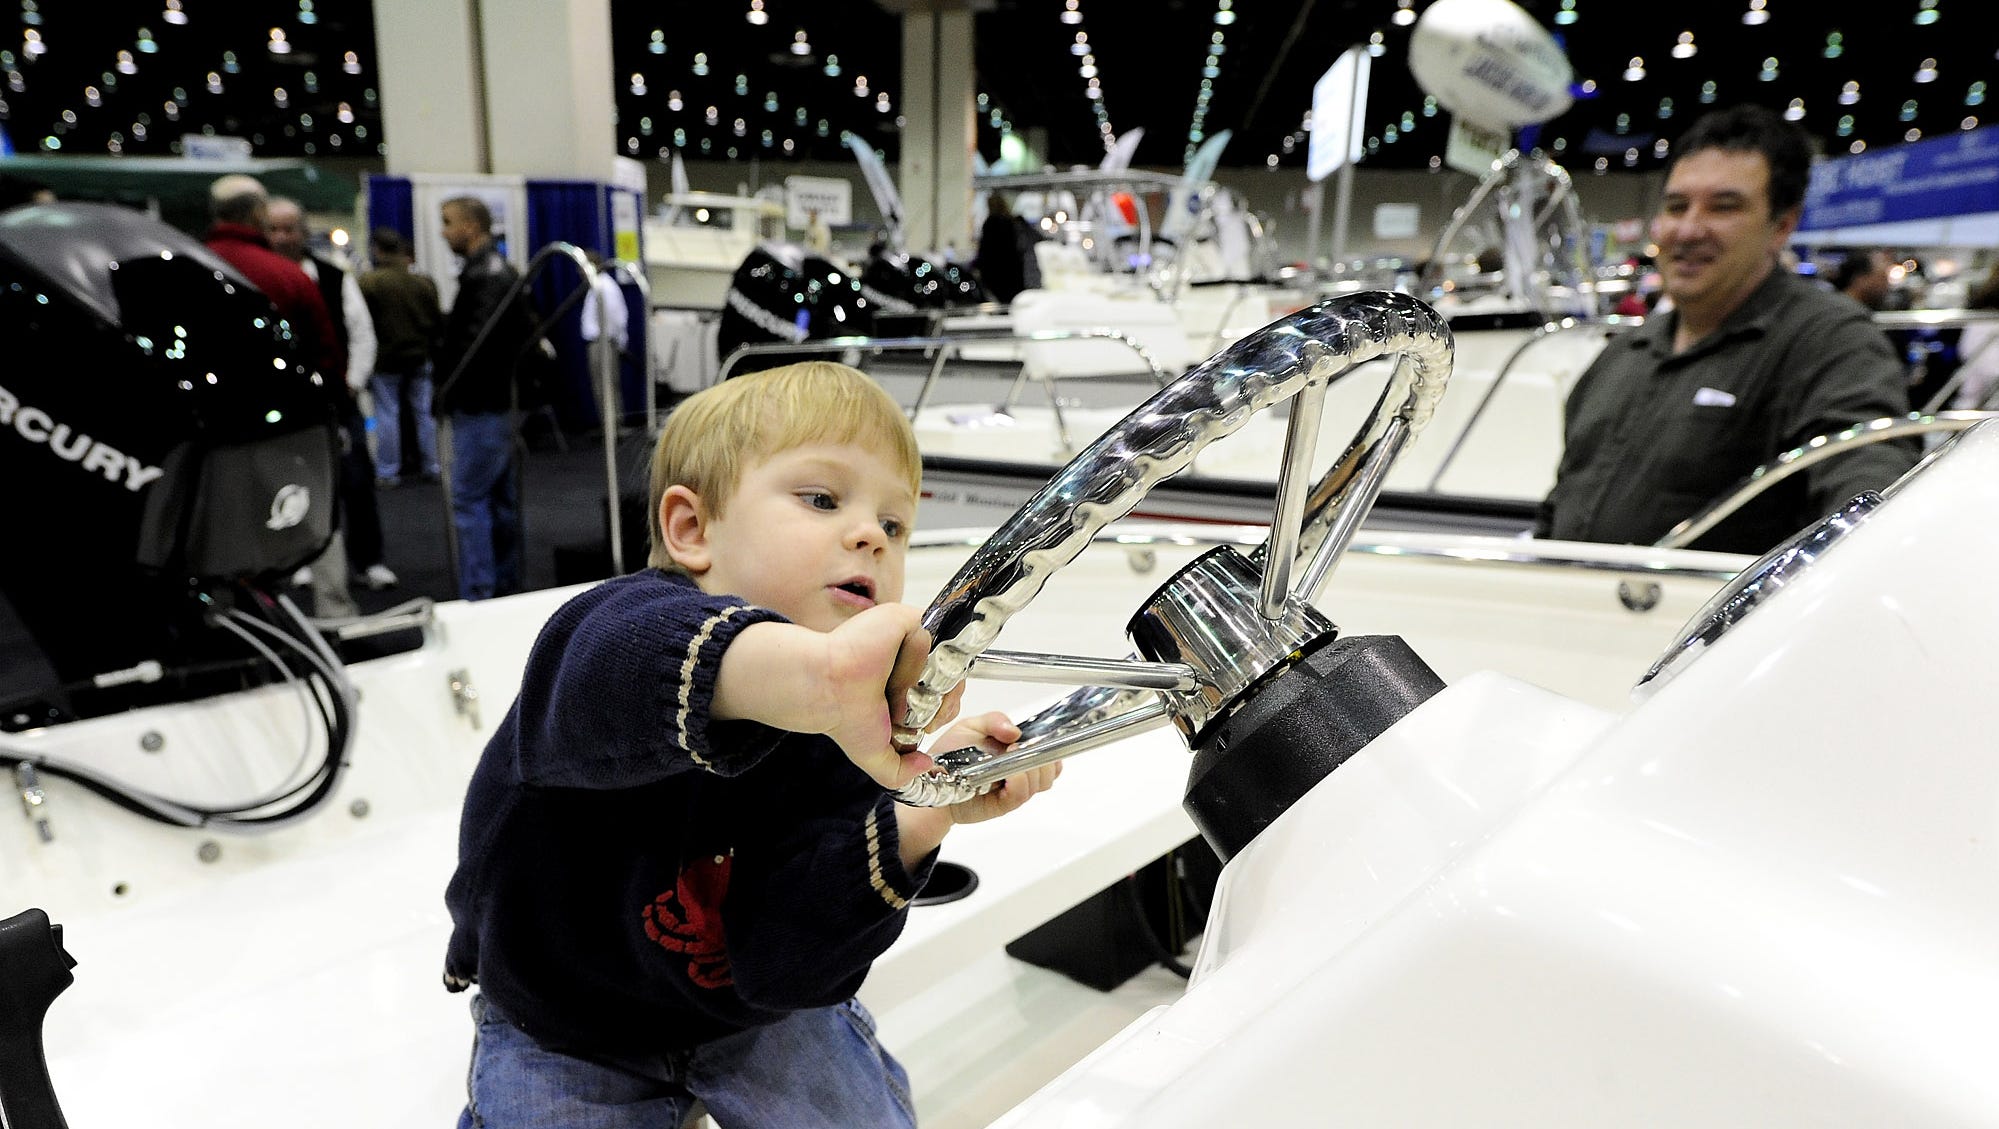 William Osborn of Flushing, 2, takes over the helm under the watchful eyes his grandfather Tim Martenies of Waterford during the 52nd Annual Boat Show at Cobo Center on Feb. 13, 2010.